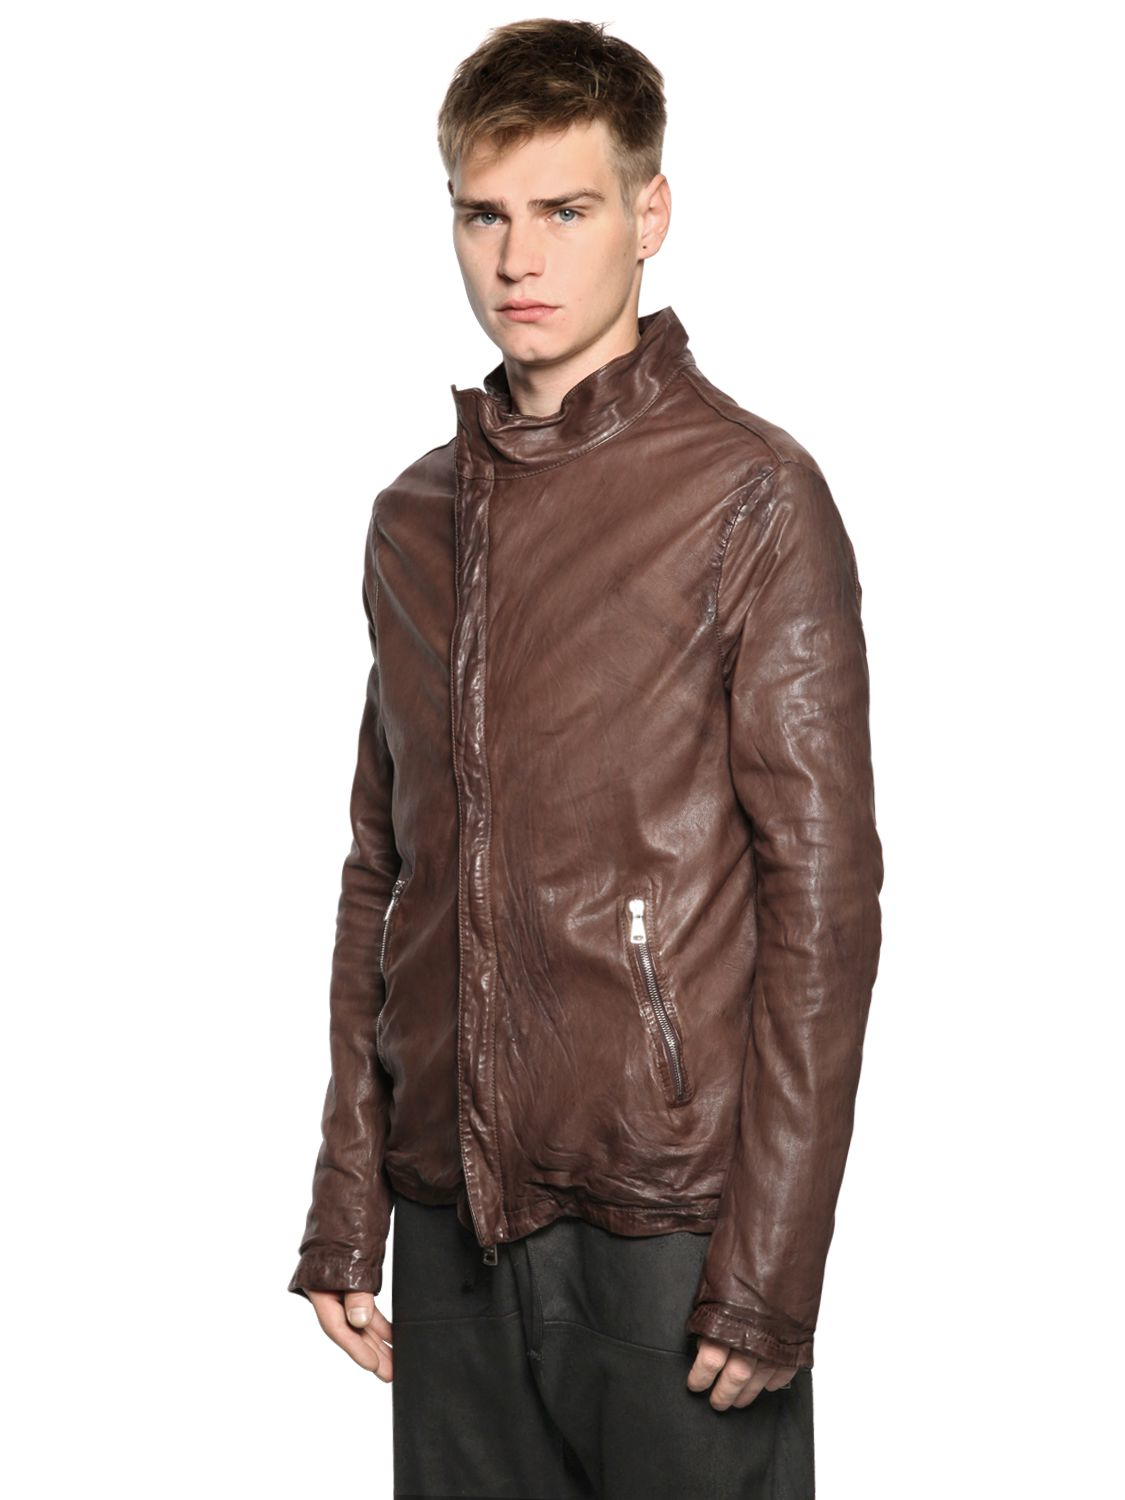 Lyst - Giorgio Brato Washed Nappa Leather Jacket in Brown for Men